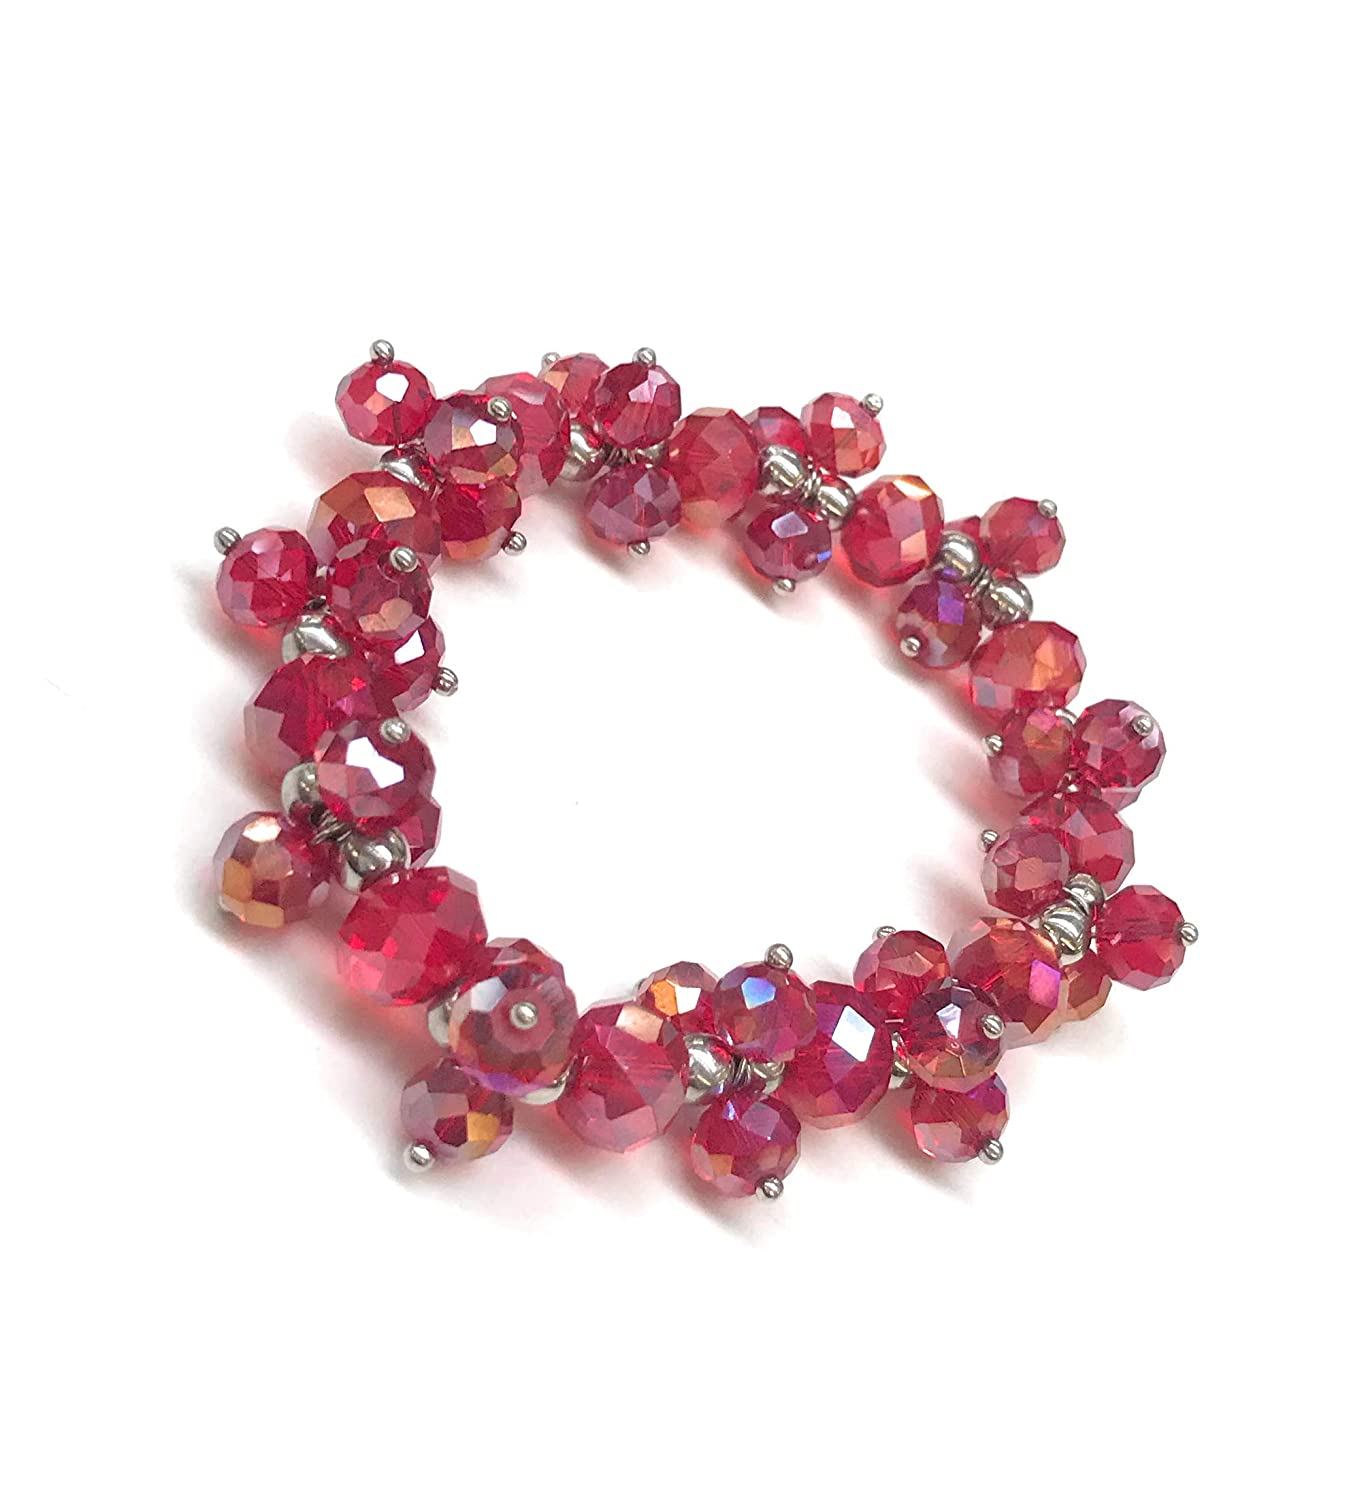 Red Beaded Cluster Stretch Bracelet from Scott D Jewelry Designs